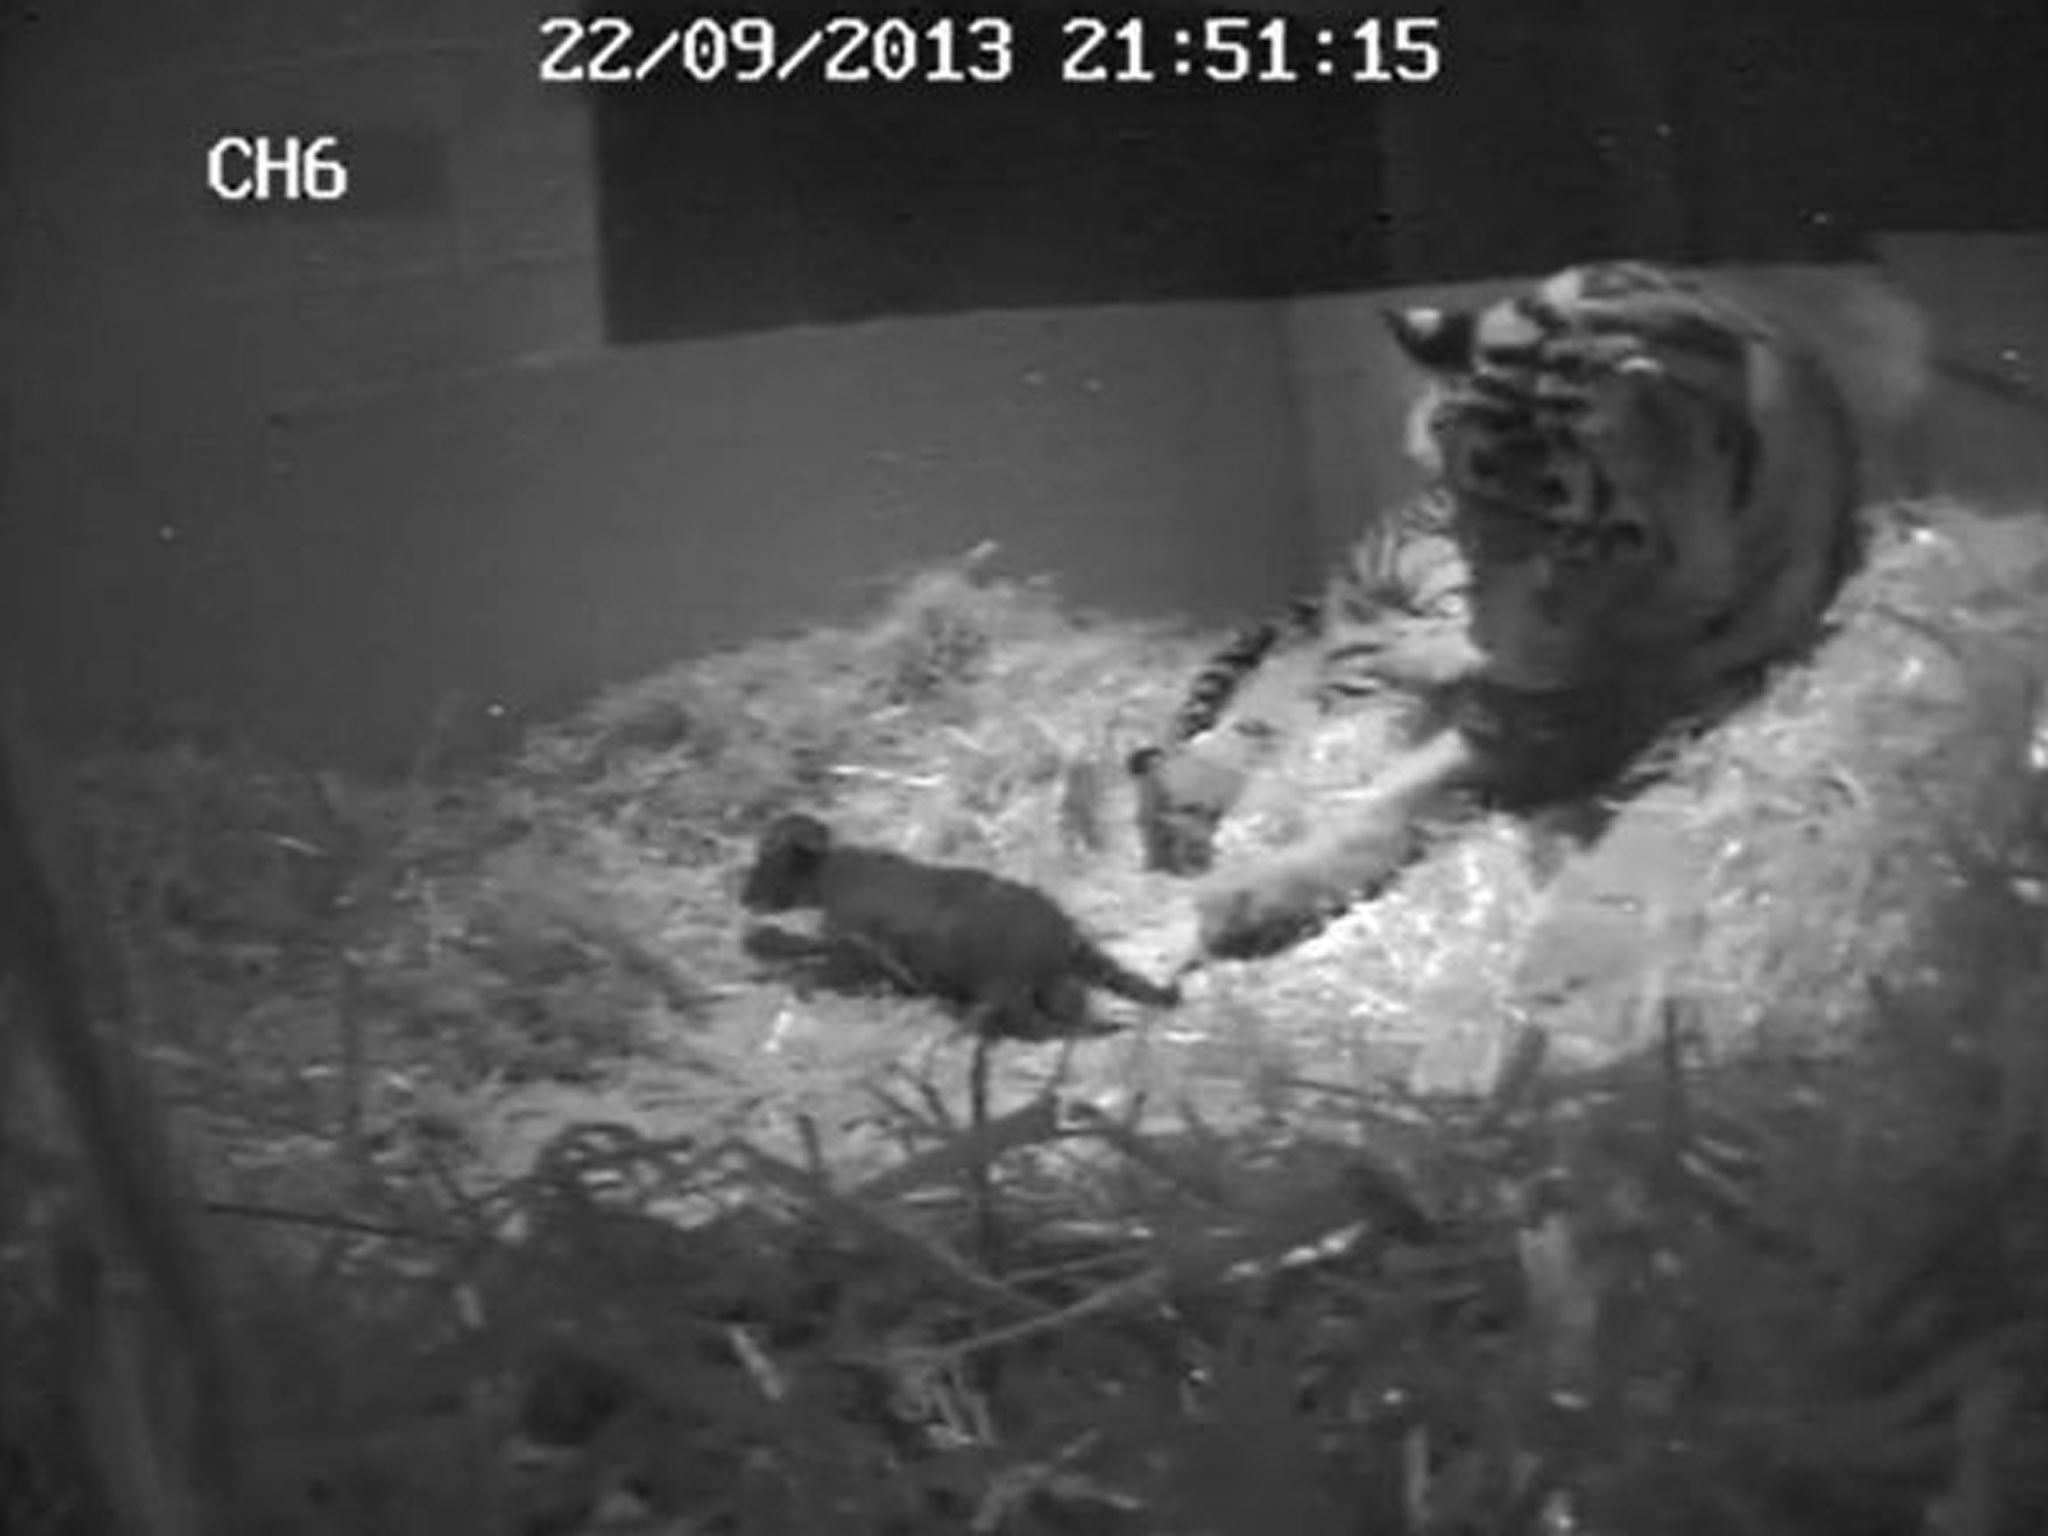 Image dated 22 September 2013 and made available by London Zoo 02 October 2013 shows the birth of ZSL London Zooís first tiger cub for 17 years which was captured on hidden cameras by zookeepers at ZSL London Zoo.